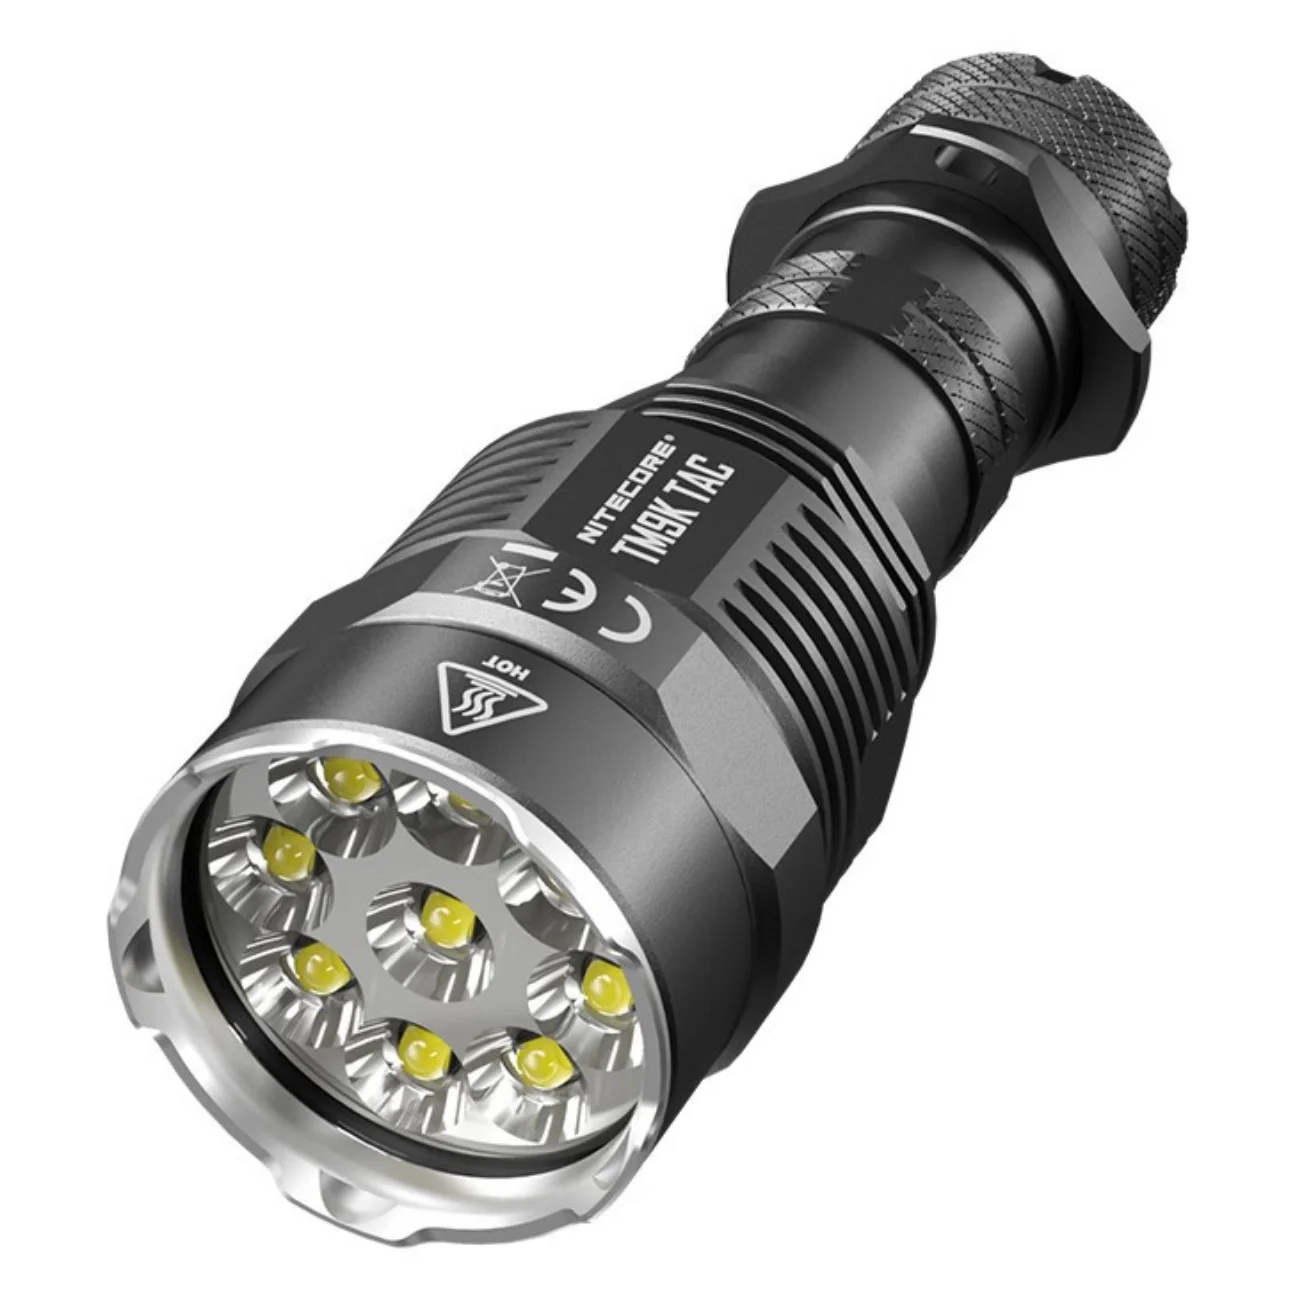 

Nitecore TM9KTAC Tactical Flashlight 9800LM CREE XP-L2 HD USB Rechargeable Powerful LED Searchlight with Battery for Camping